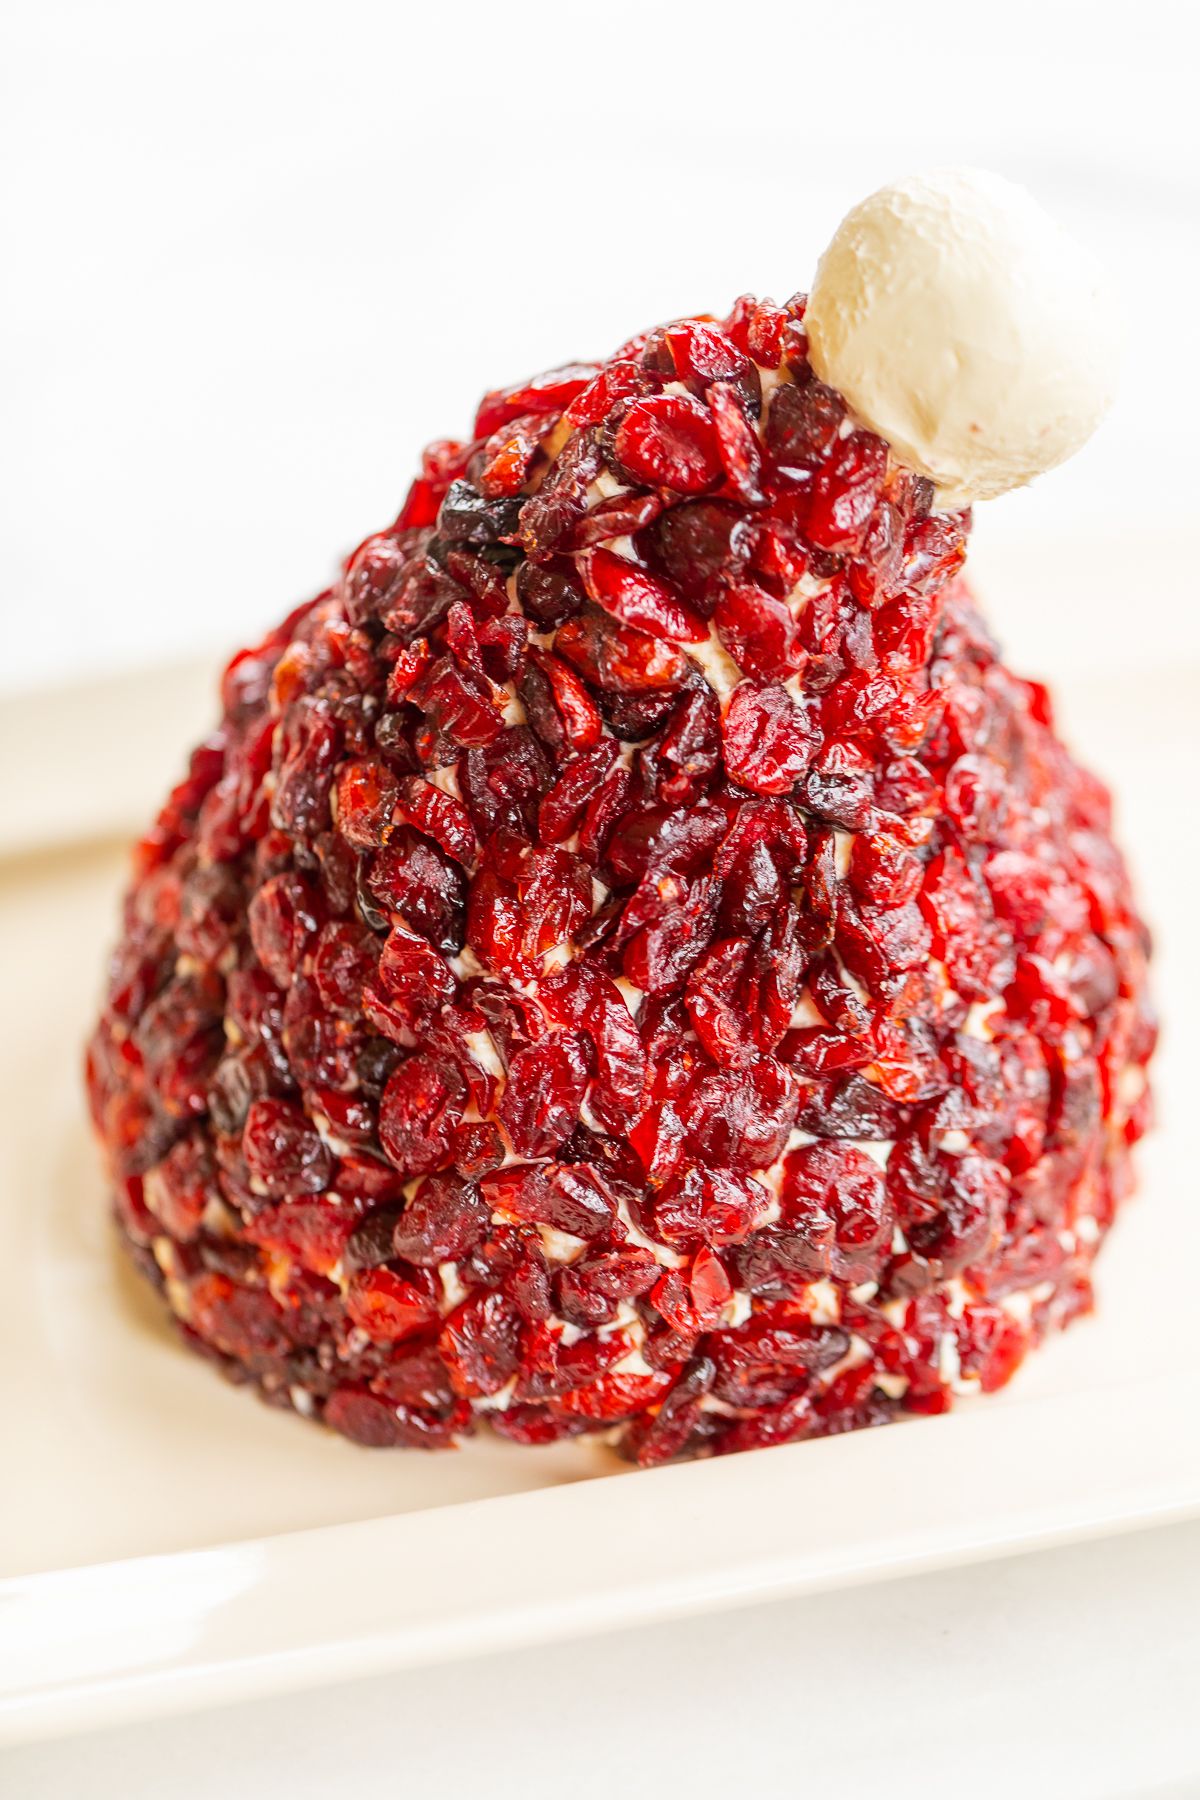 A cranberry cheeseball in the shape of a Santa's hat, on a white plate.